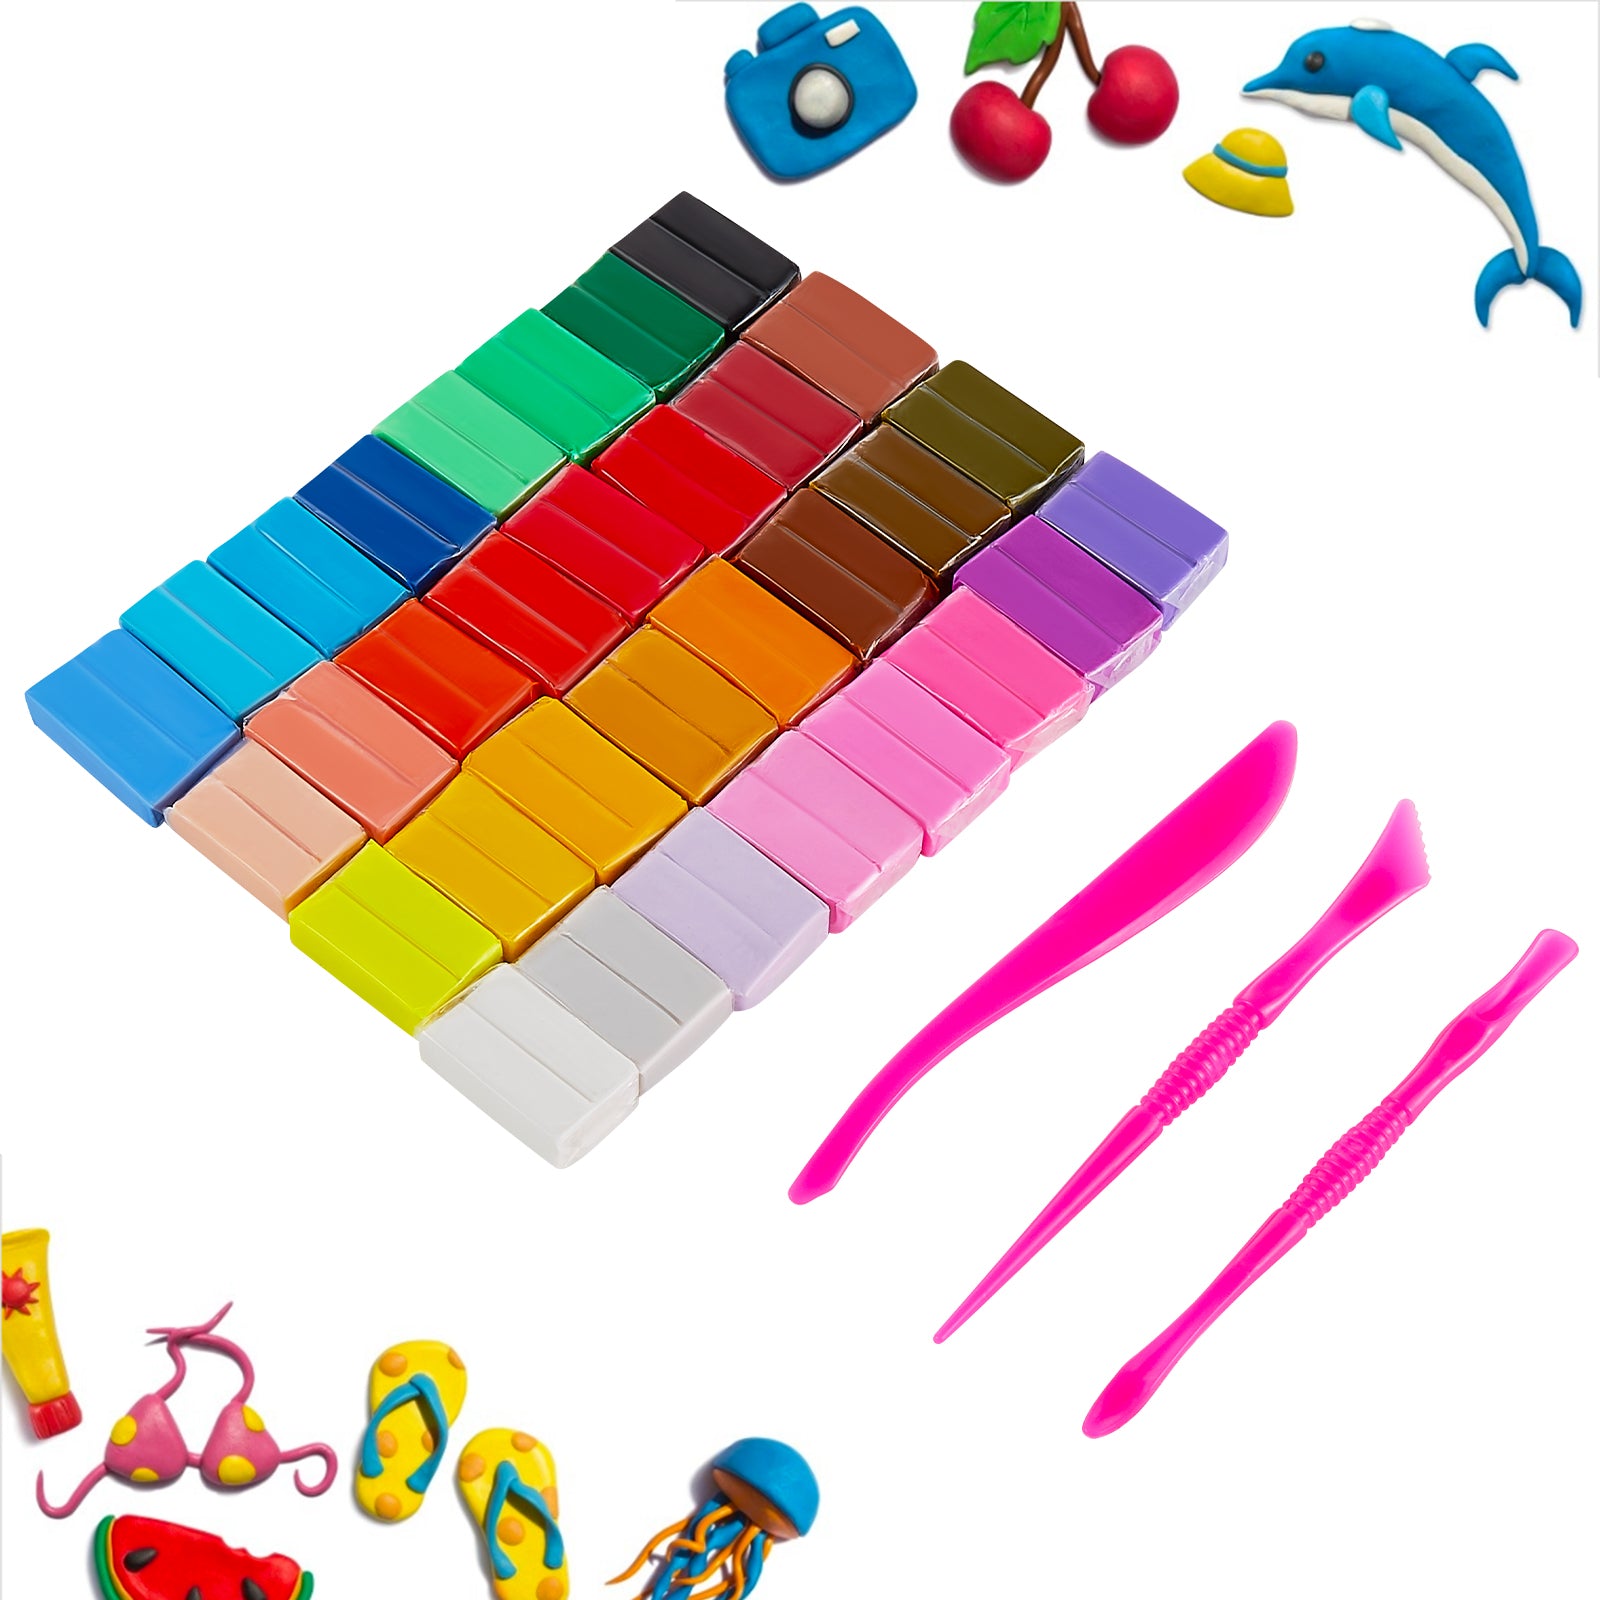 CiaraQ Polymer Clay-Oven Baked Modeling Clay with Sculpting Tools 50 Colors  3.41 lbs 50 Colors